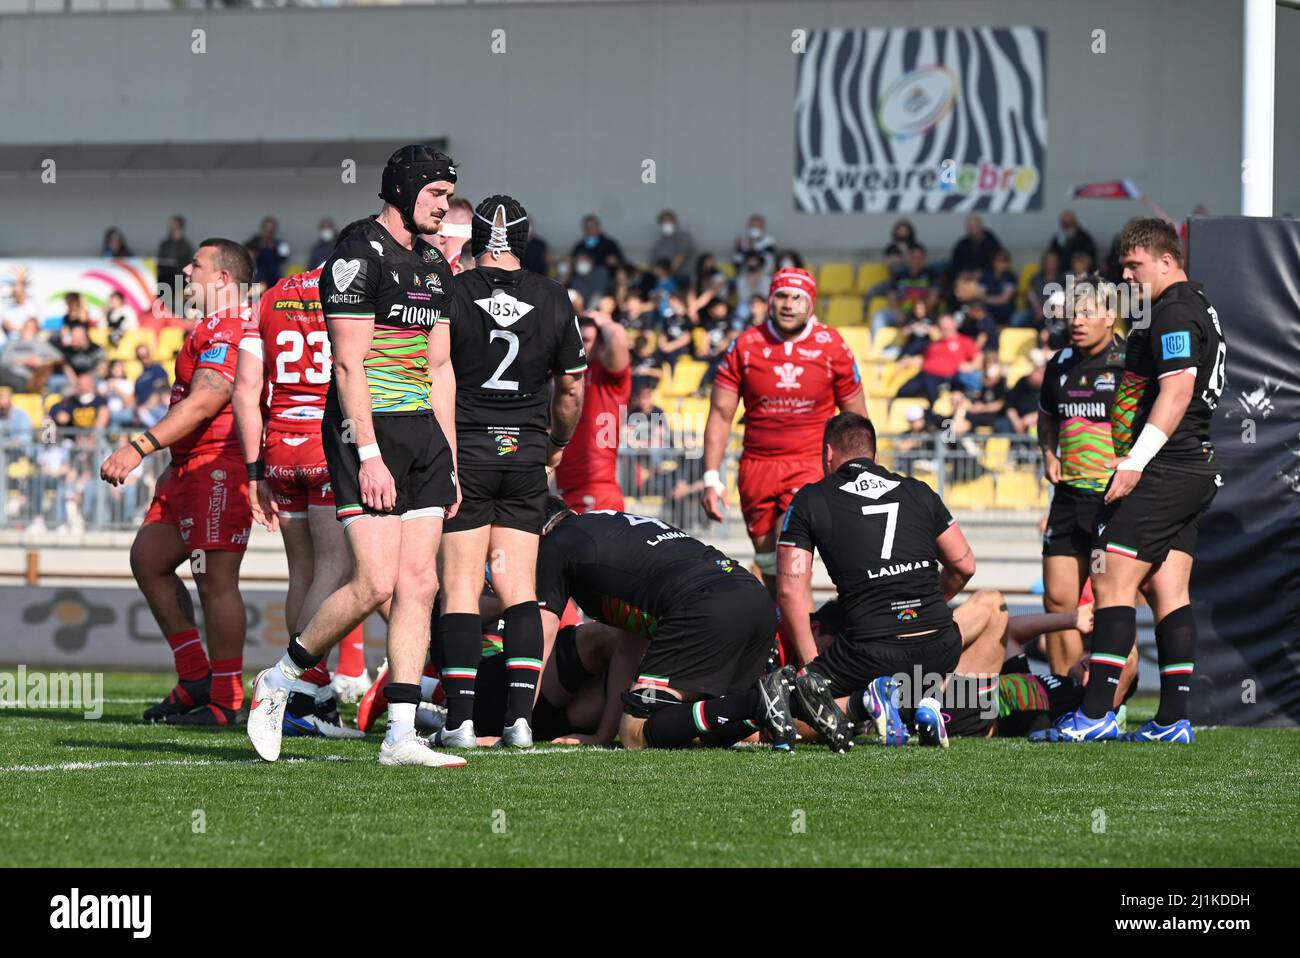 Parma, Italia. 26th Mar, 2022. Prova per scarlets durante Zebre Rugby Club vs Scarlets, United Rugby Championship match a Parma, Italy, March 26 2022 Credit: Independent Photo Agency/Alamy Live News Foto Stock